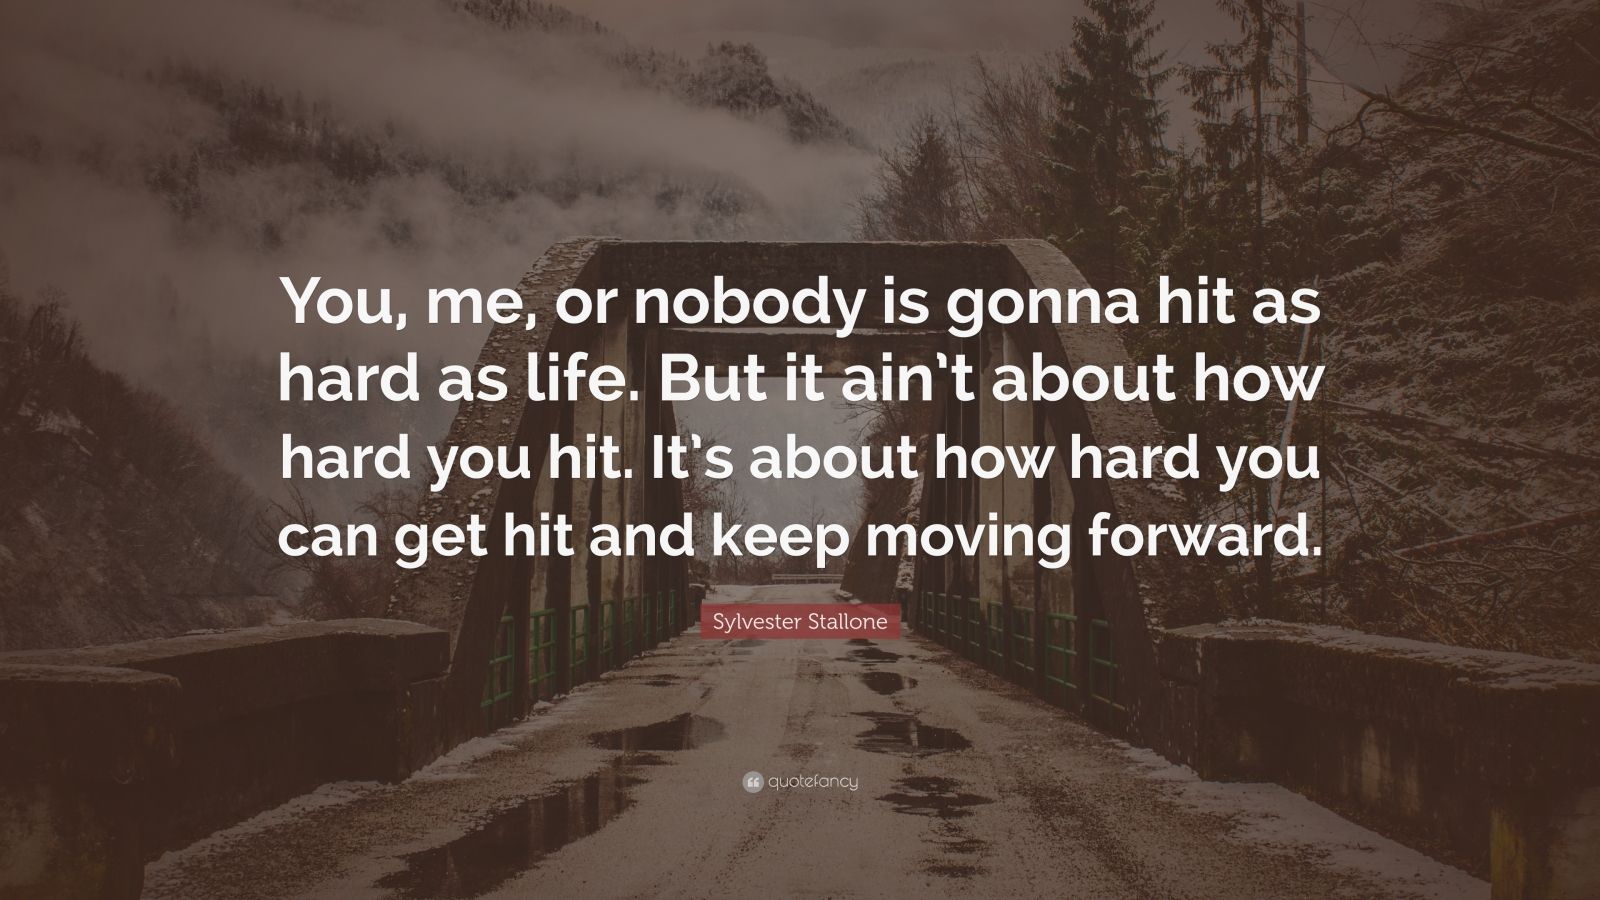 Sylvester Stallone Quote: “You, me, or nobody is gonna hit as hard as